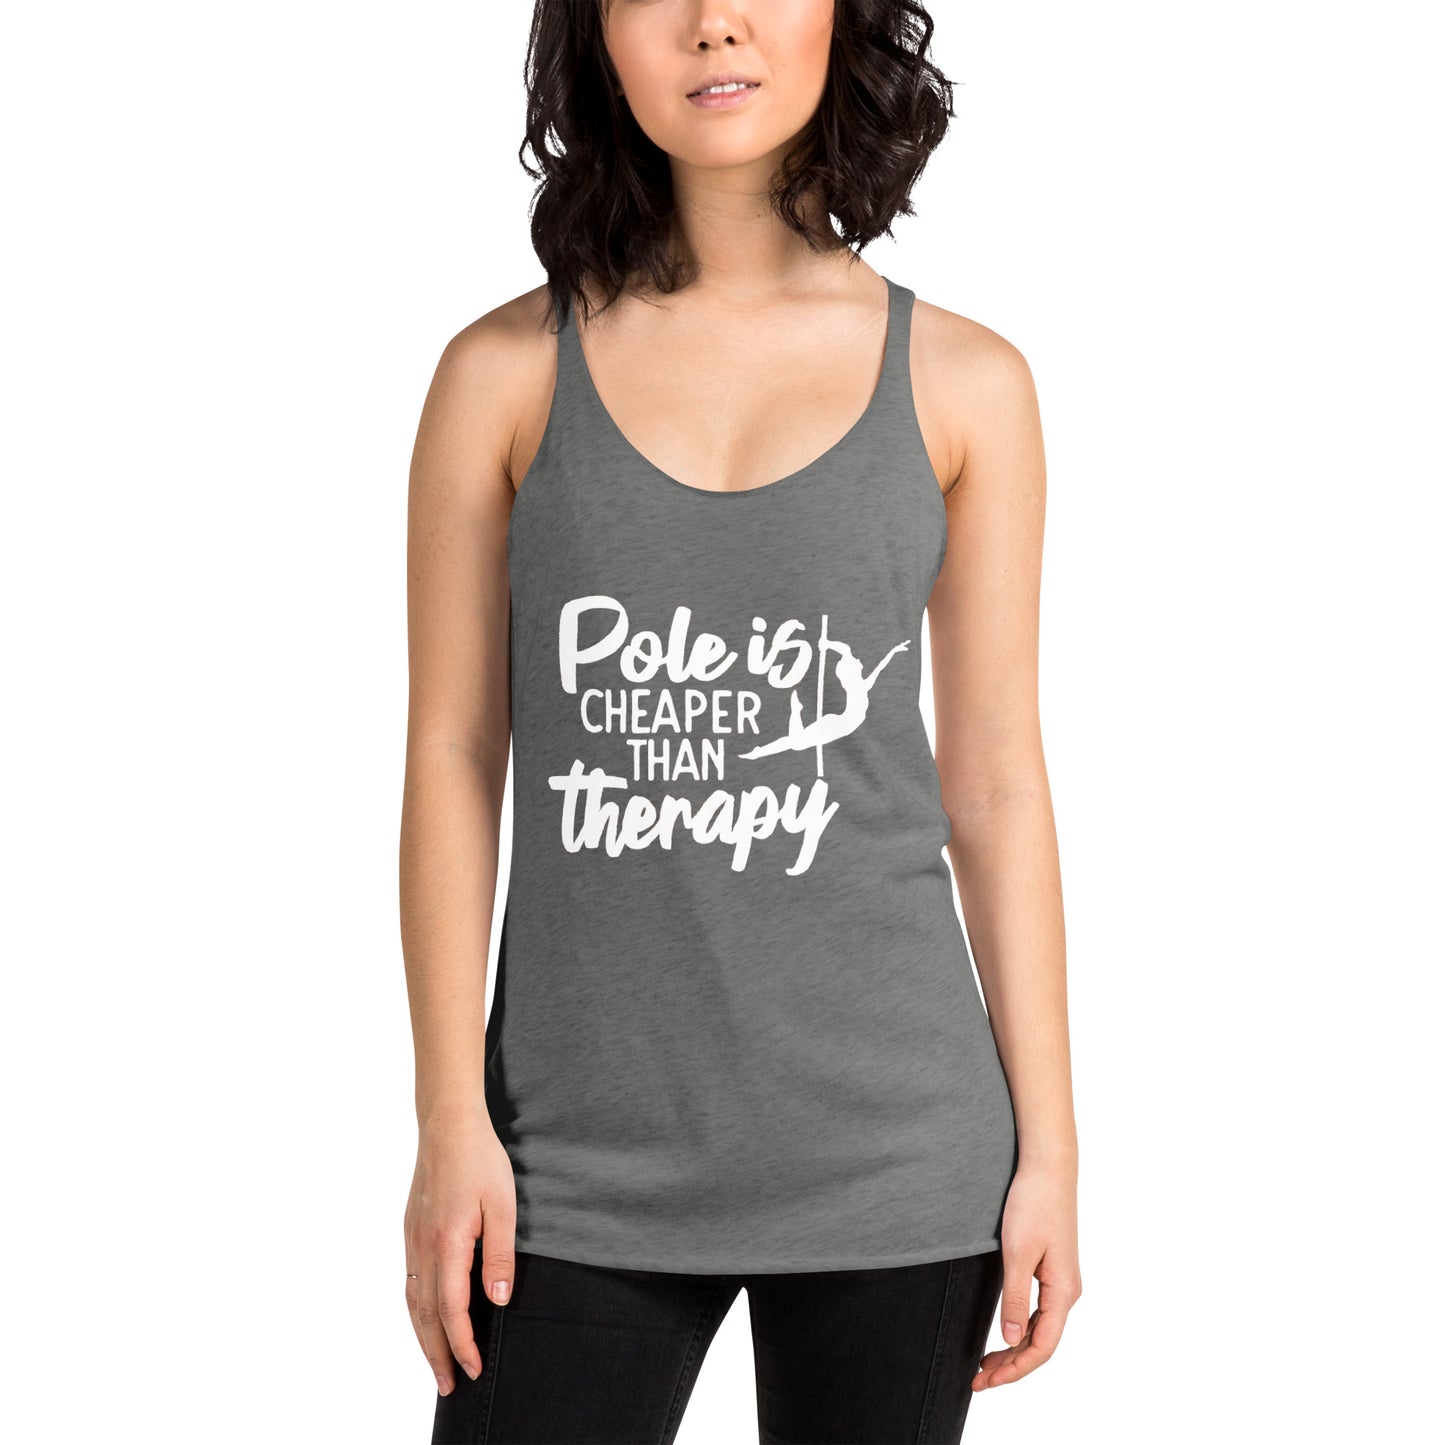 Pole Is Cheaper Than Therapy - Women's Racerback Tank